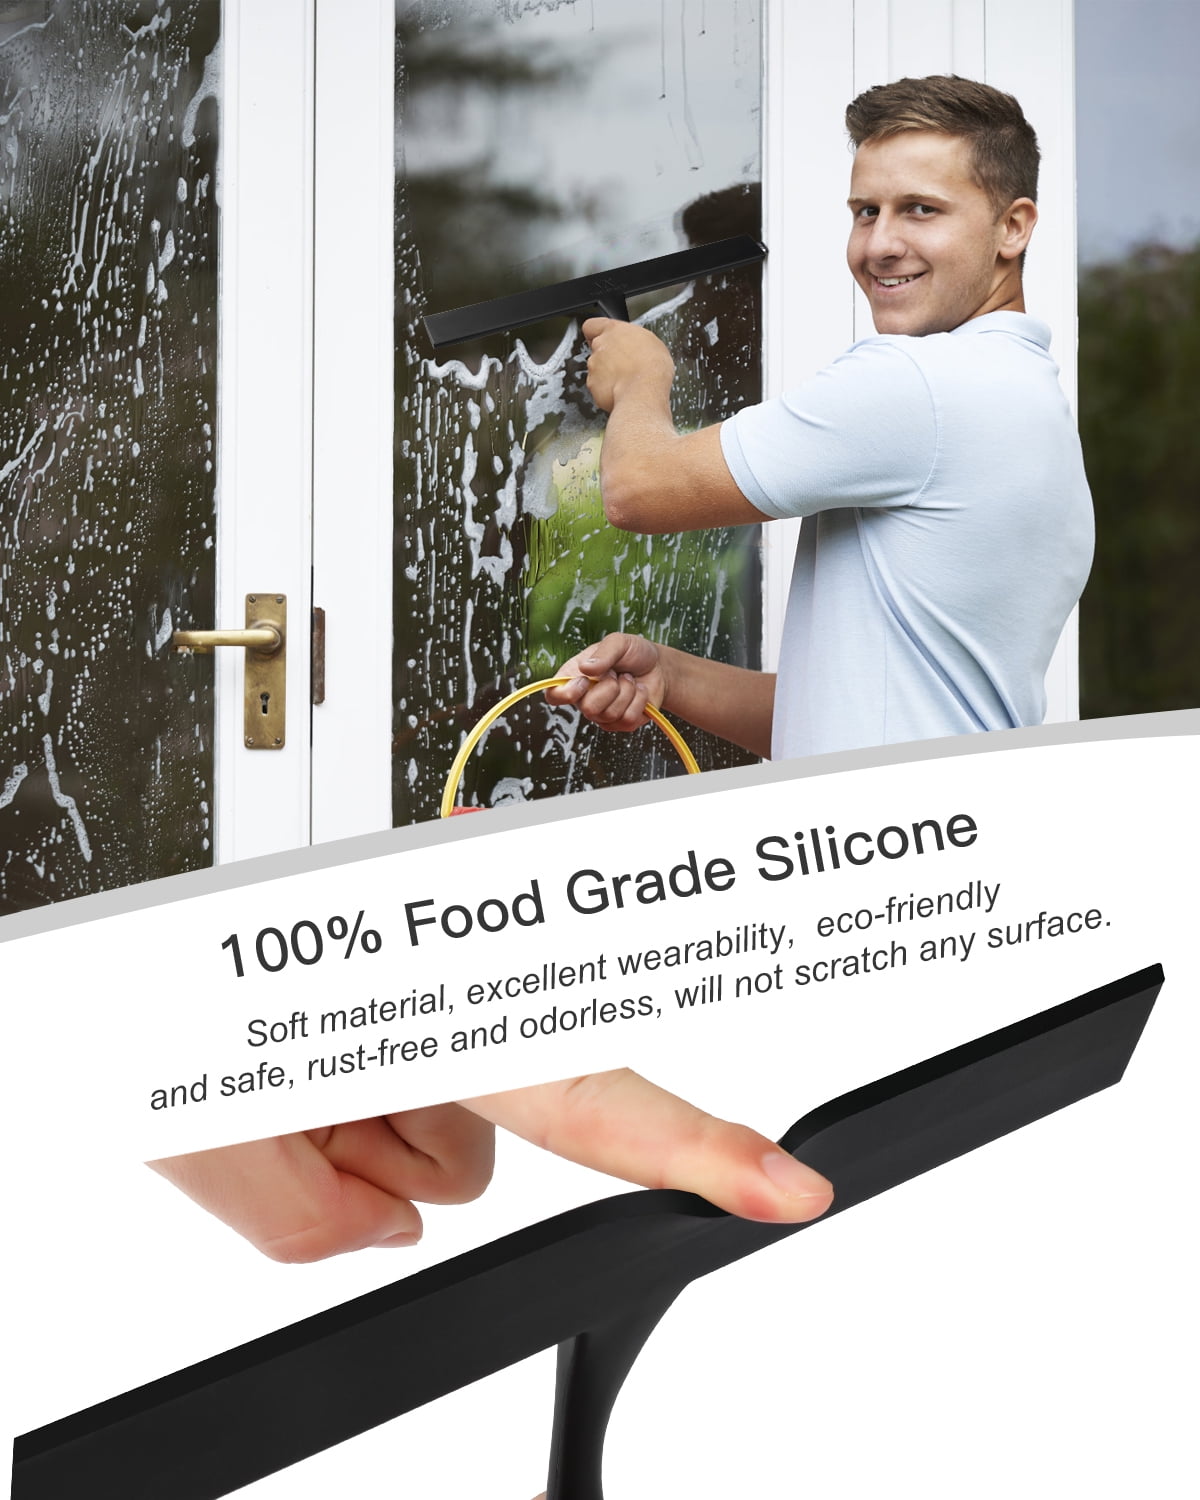 Shower Squeegee for Shower Glass Doors 11-Inch Bathroom Squeegee Shower Door Silicone Squeegees Wiper with Non-Slip Handle, Self-Adhesive Silicone